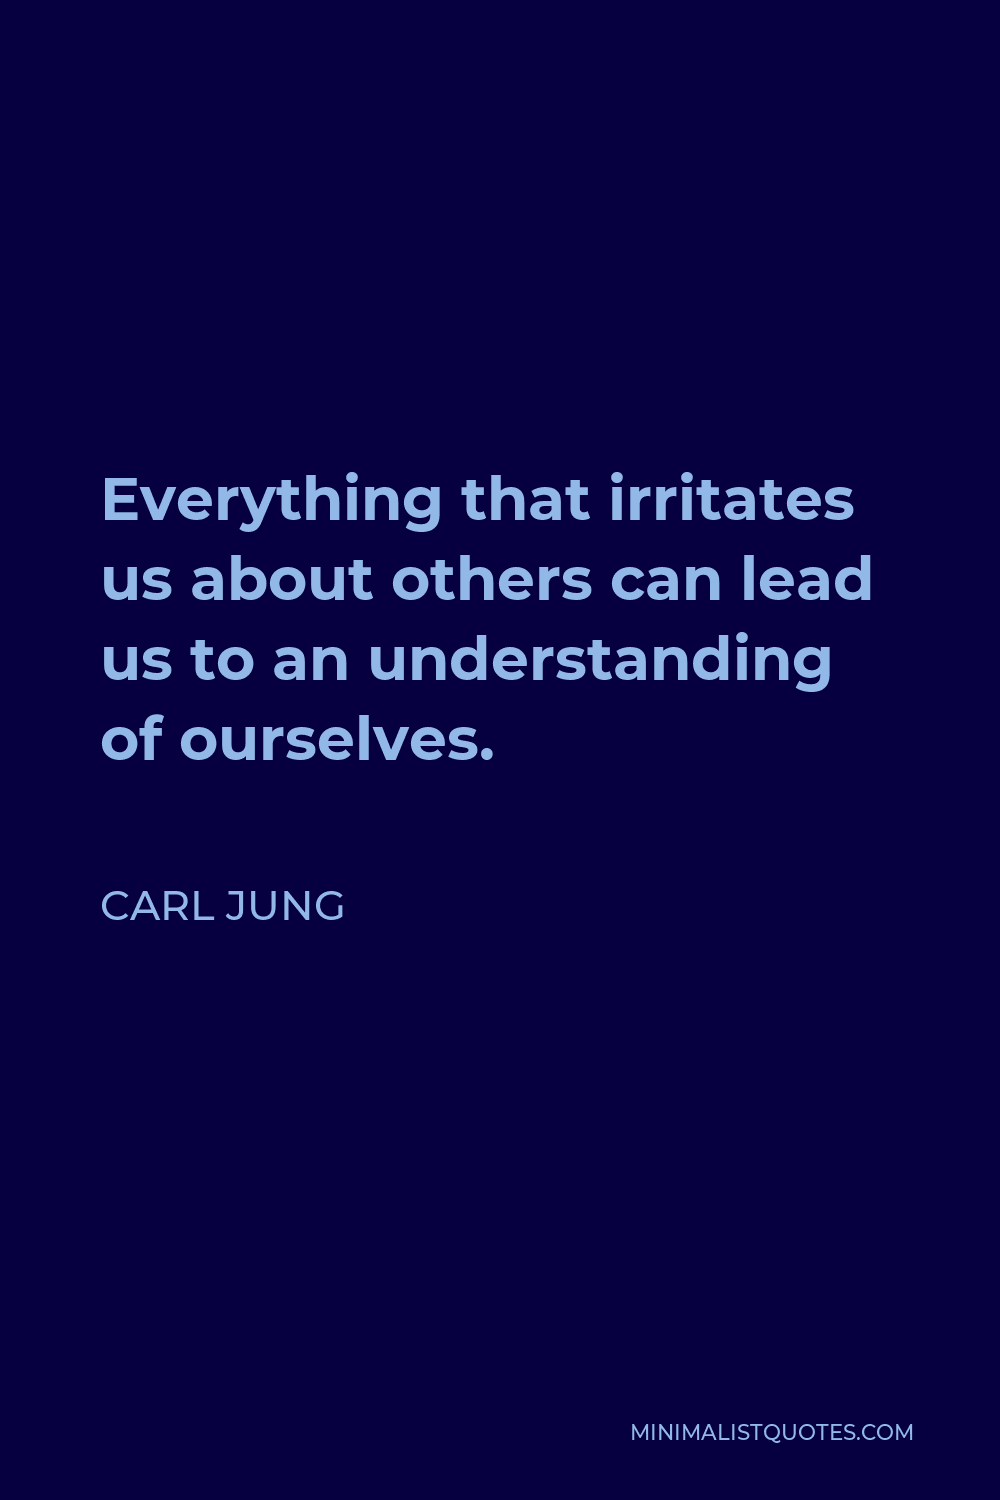 Carl Jung Quote - Everything that irritates us about others can lead us to an understanding of ourselves.